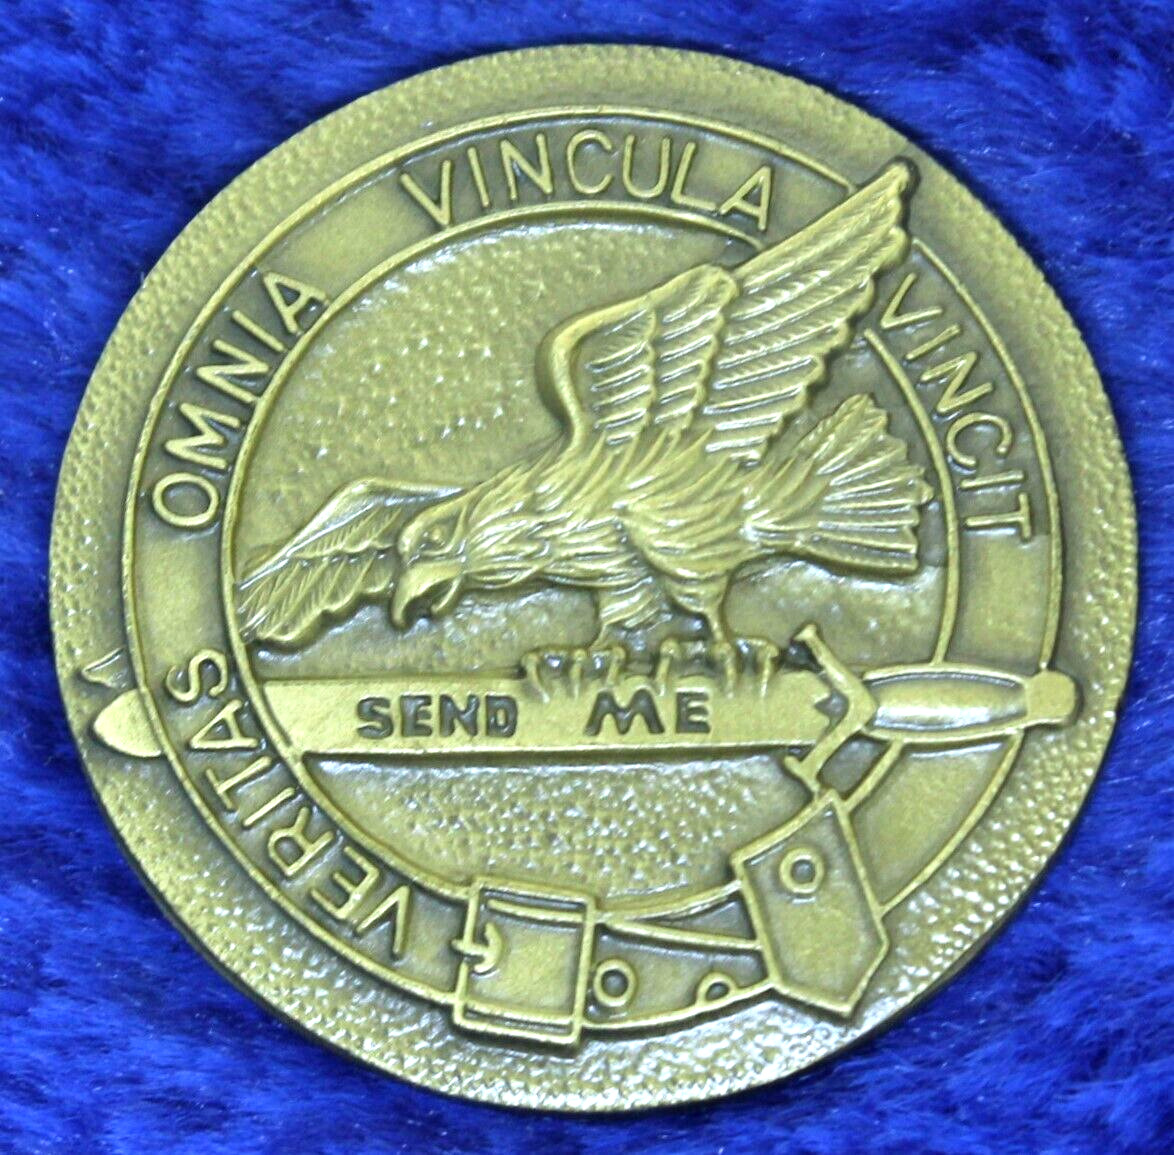 Intelligence Support Activity Unit Original 1981 Challenge Coin - ISA CIA PT-10